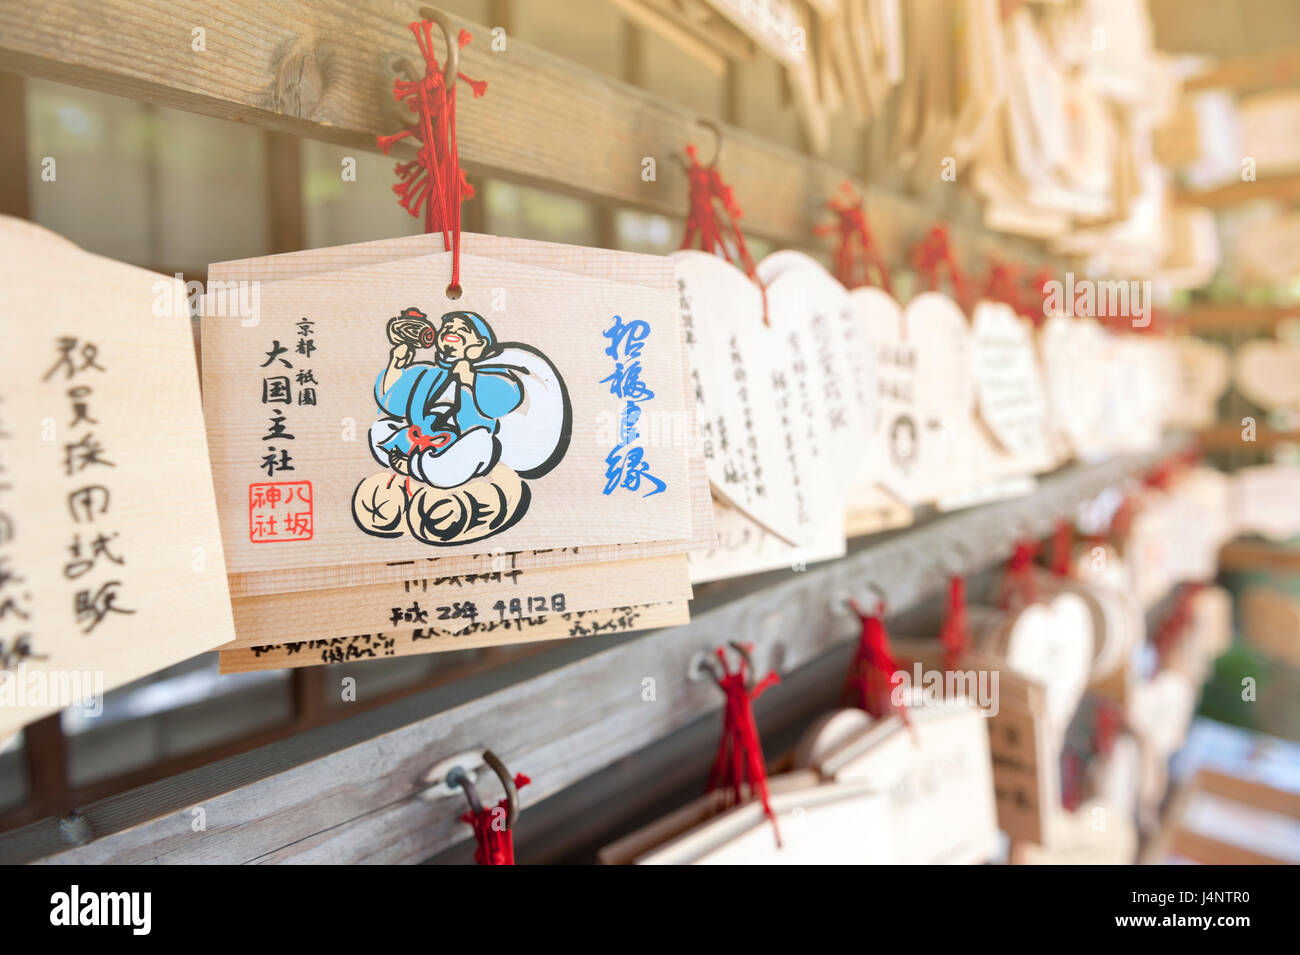 Japanese Ema or small wooden votive plaques on which Shinto worshippers write their prayers or wishes then left hanging up at a shrine Stock Photo